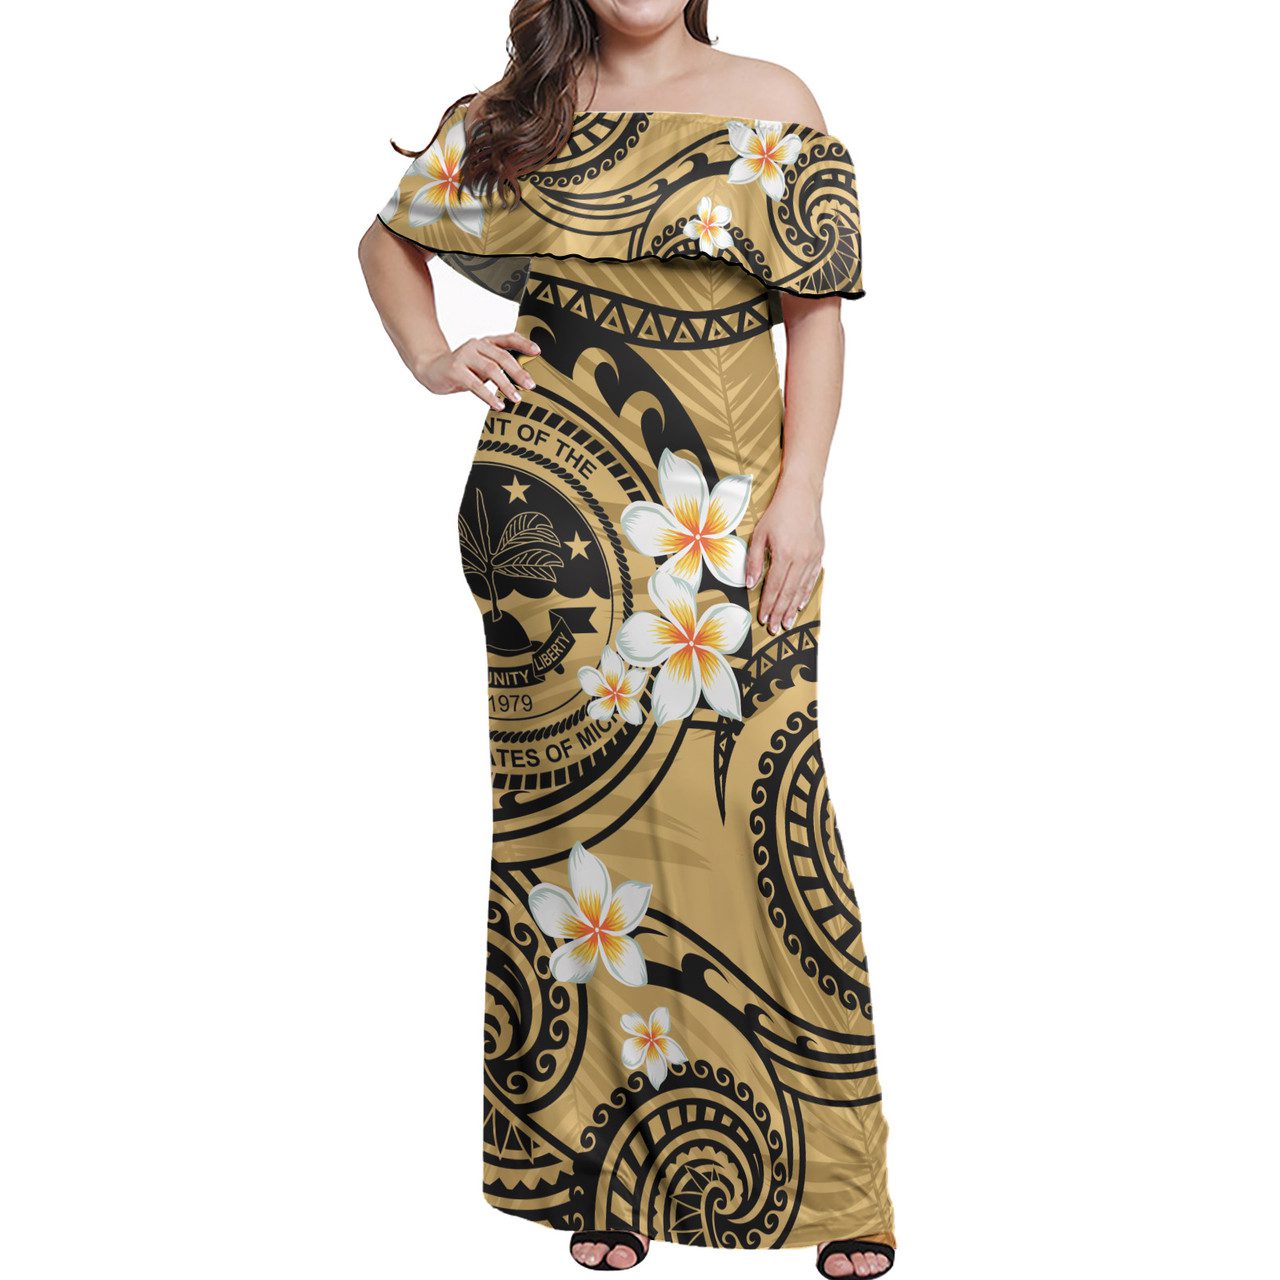 Federated States Of Micronesia Off Shoulder Long Dress Plumeria Flowers Tribal Motif Yellow Version